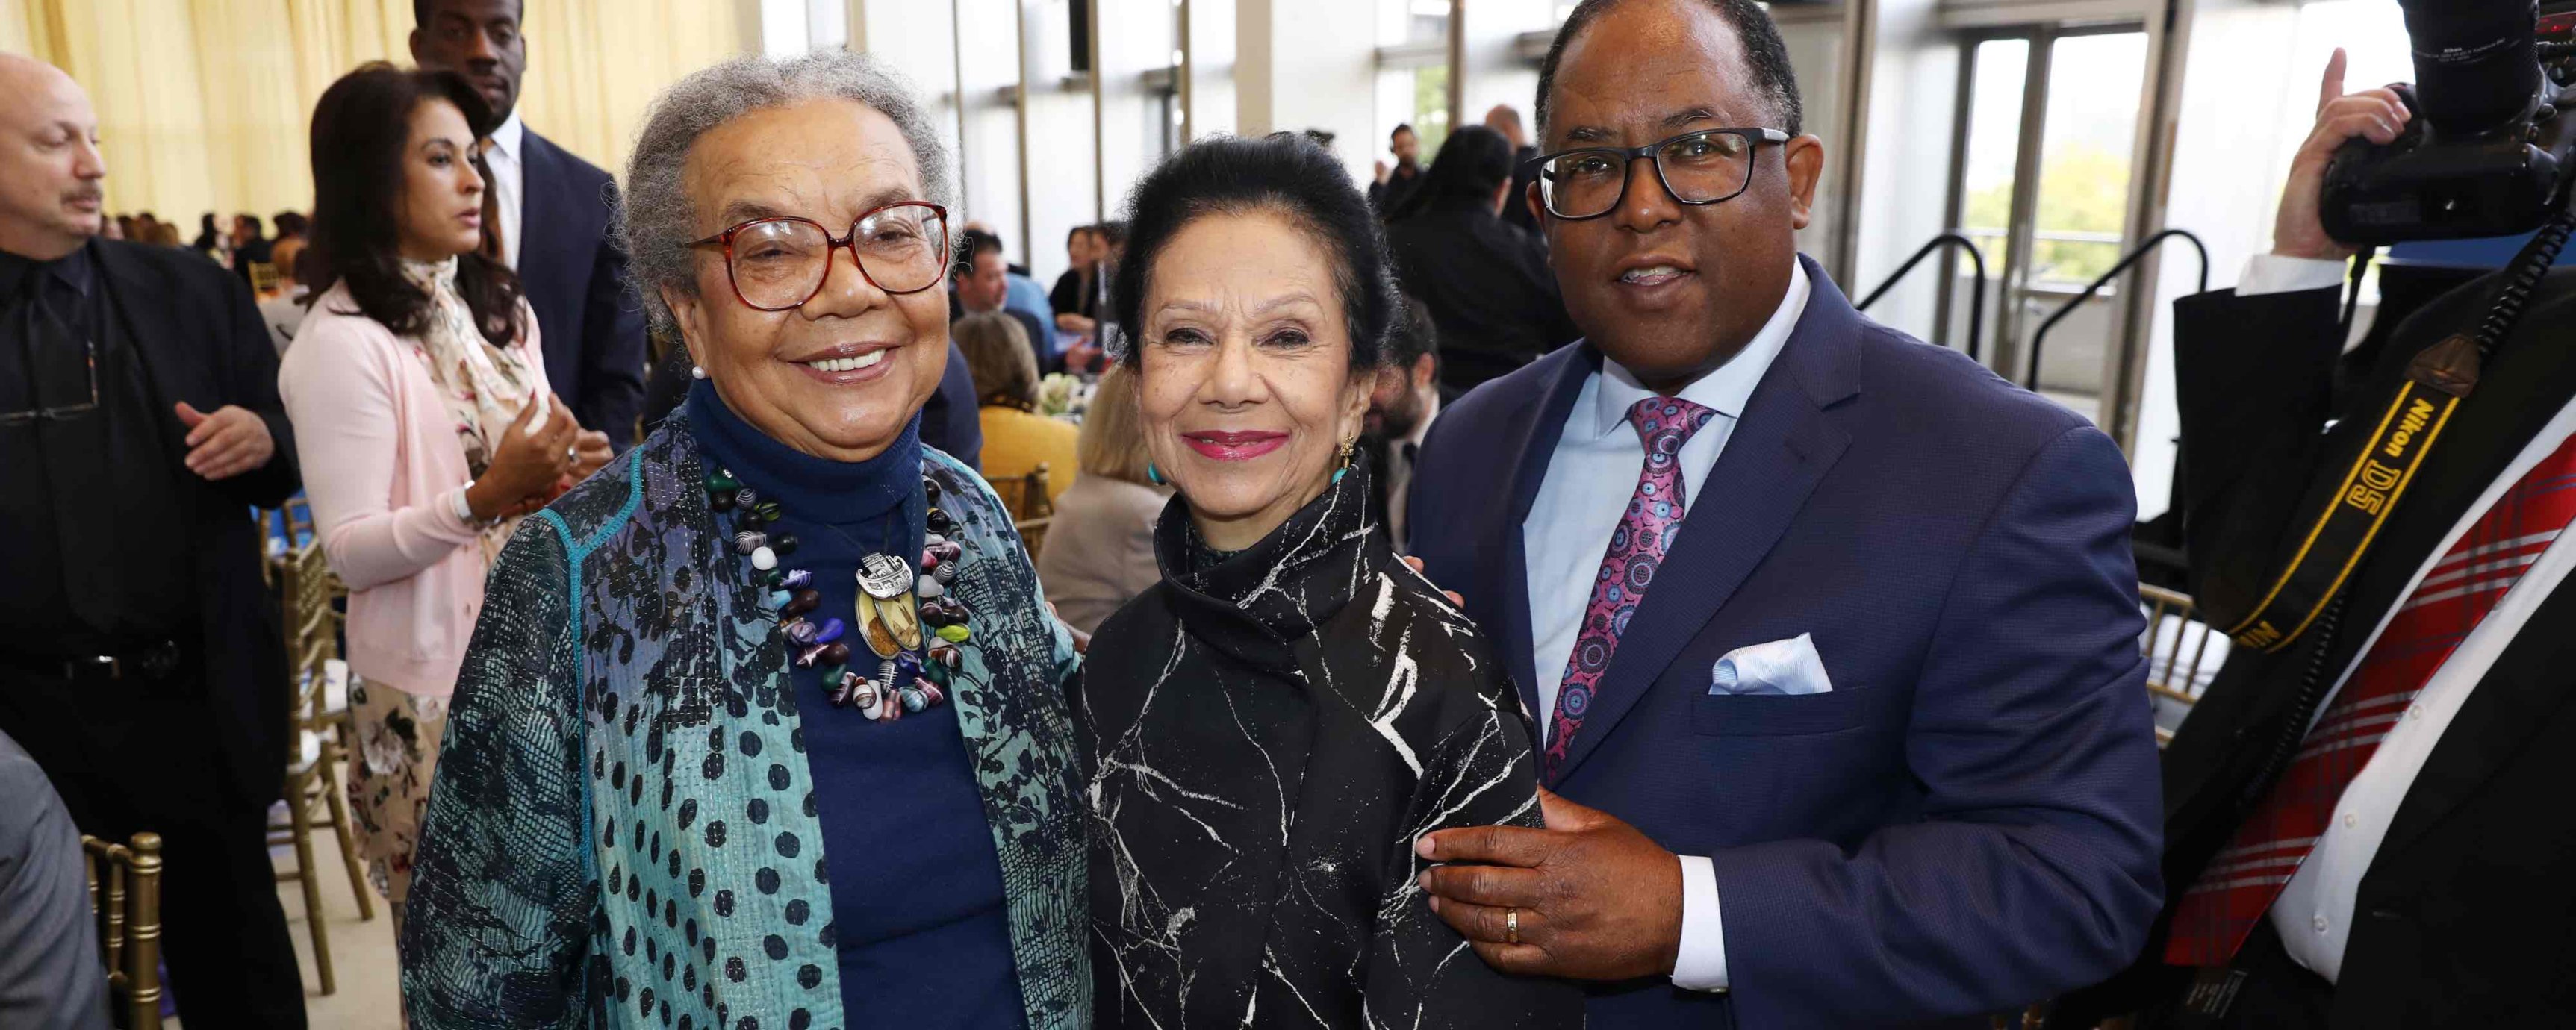 Marian Ray Edelman, an older Black woman, standing next to and Mark Ridley-Thomas, an older Black man